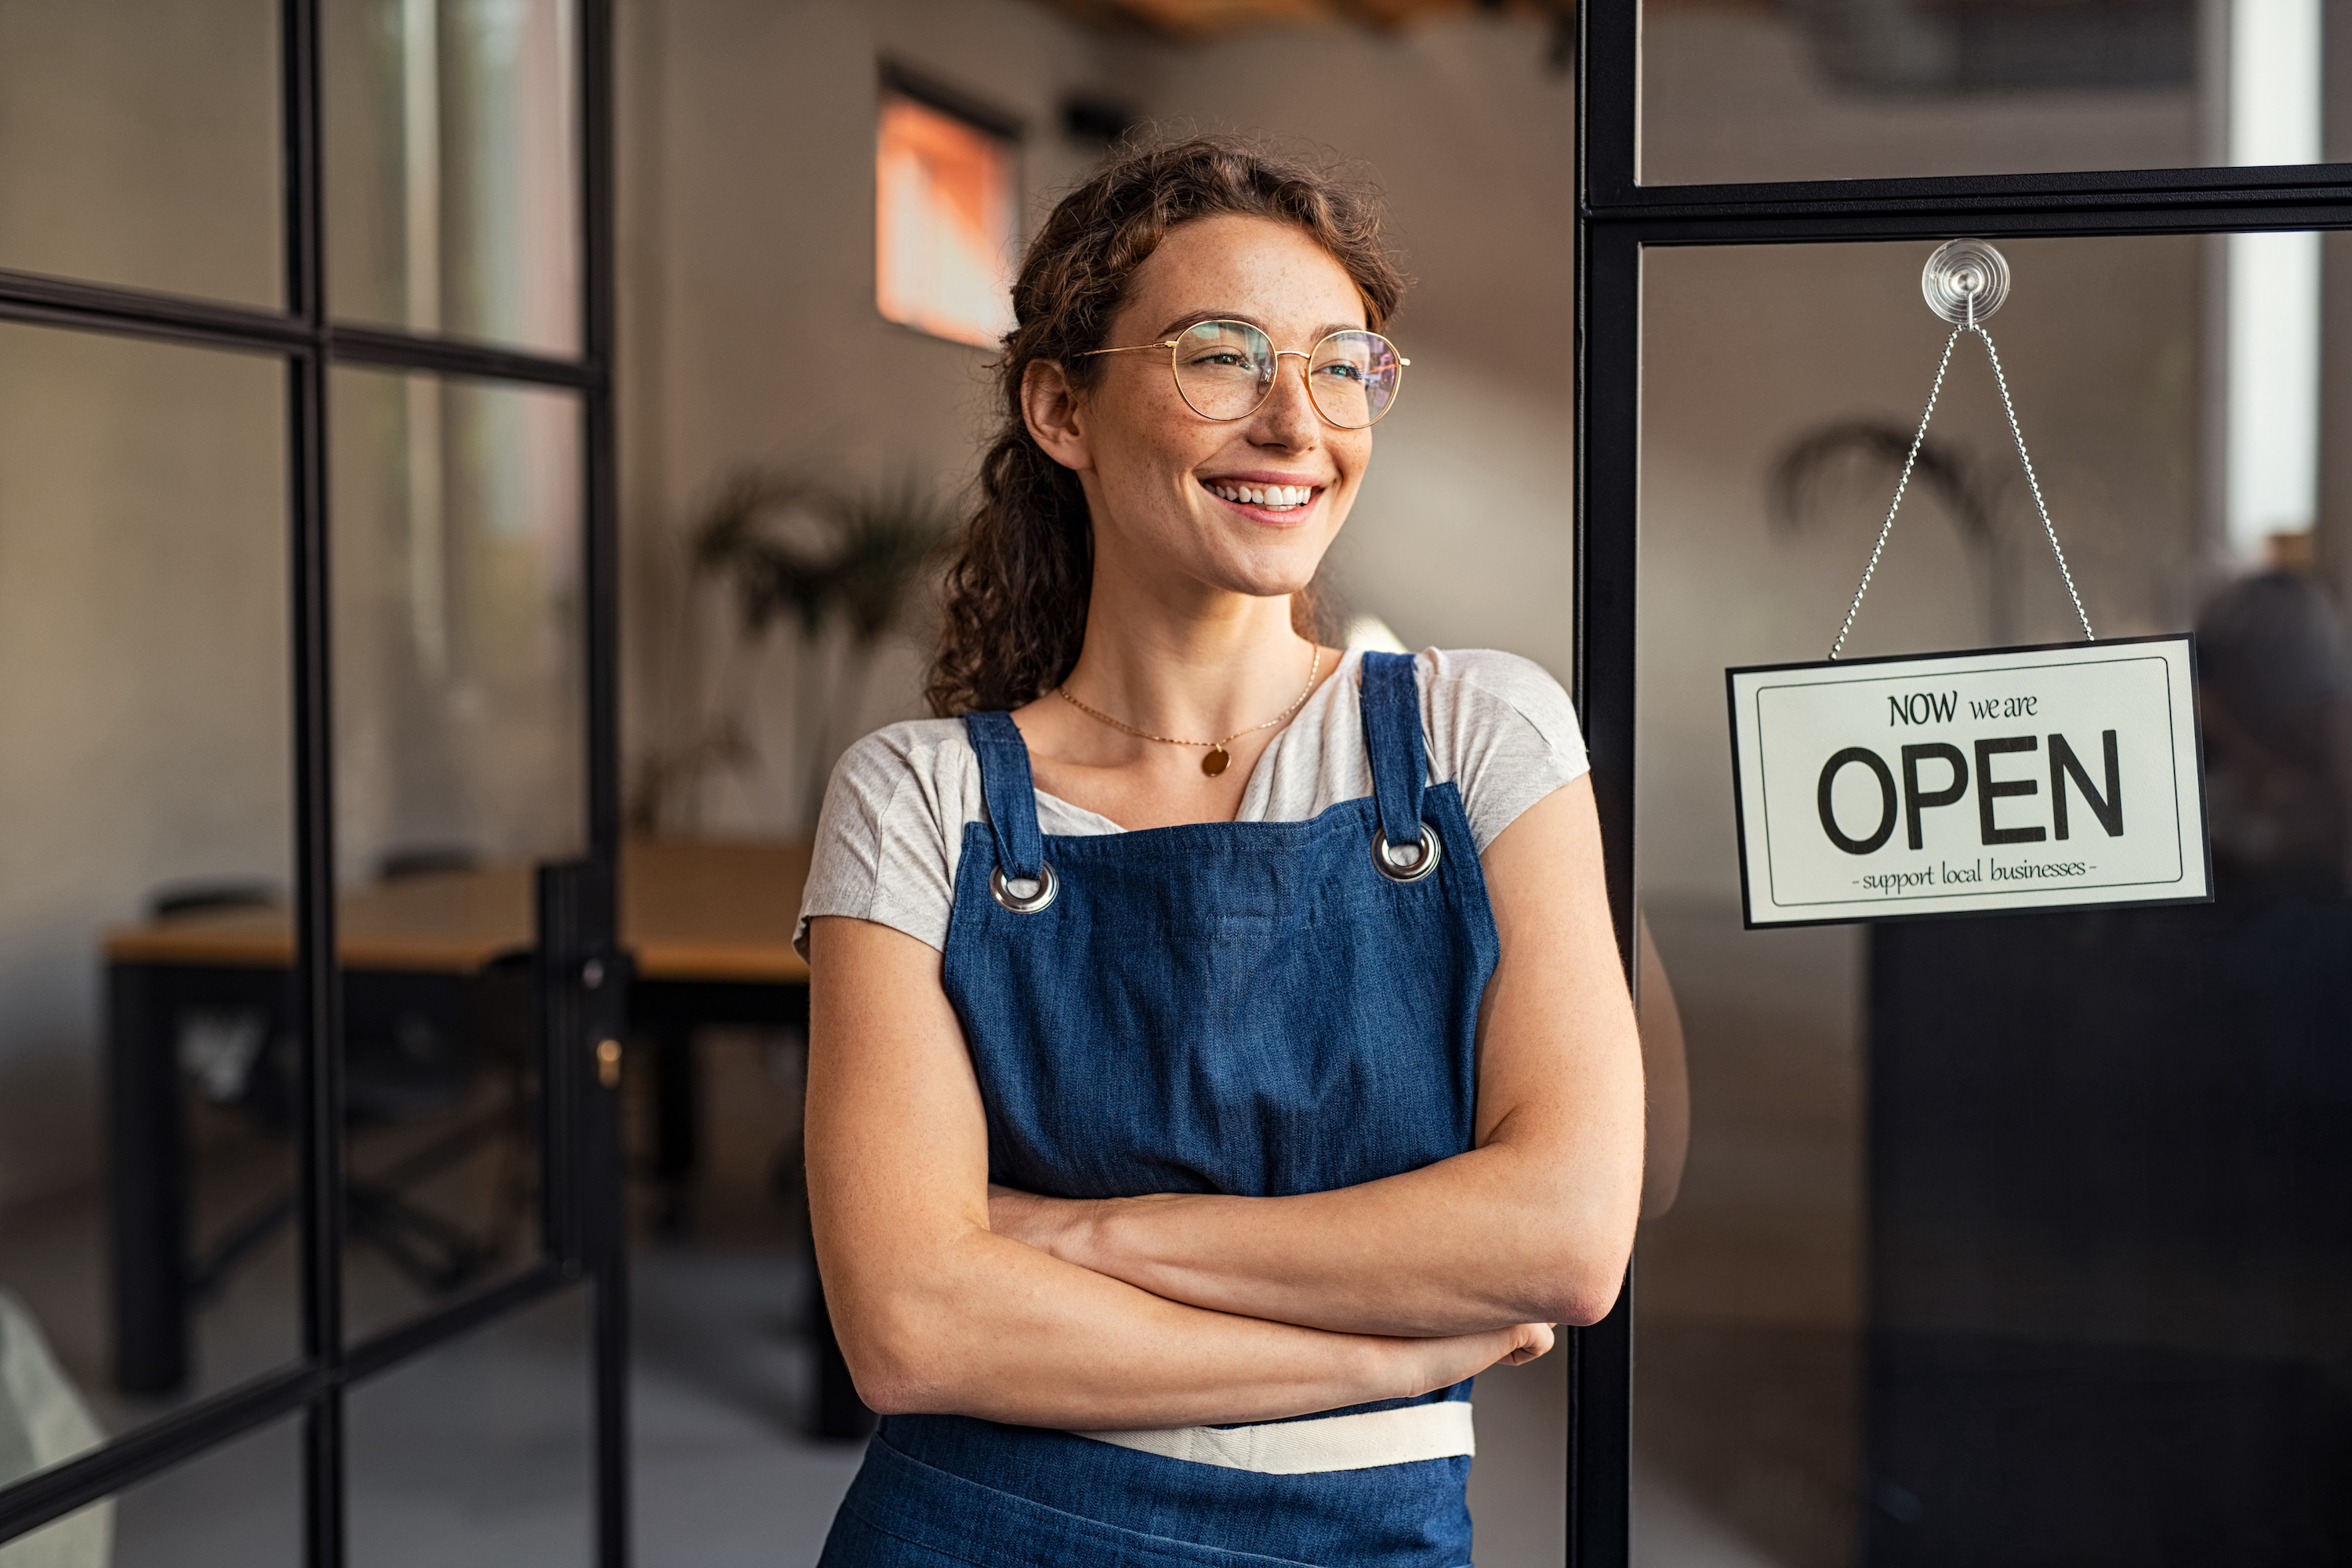 Setting up an LLC is a great way for business owners to limit their liability for company debts. Here’s a step-by-step guide to forming an LLC.